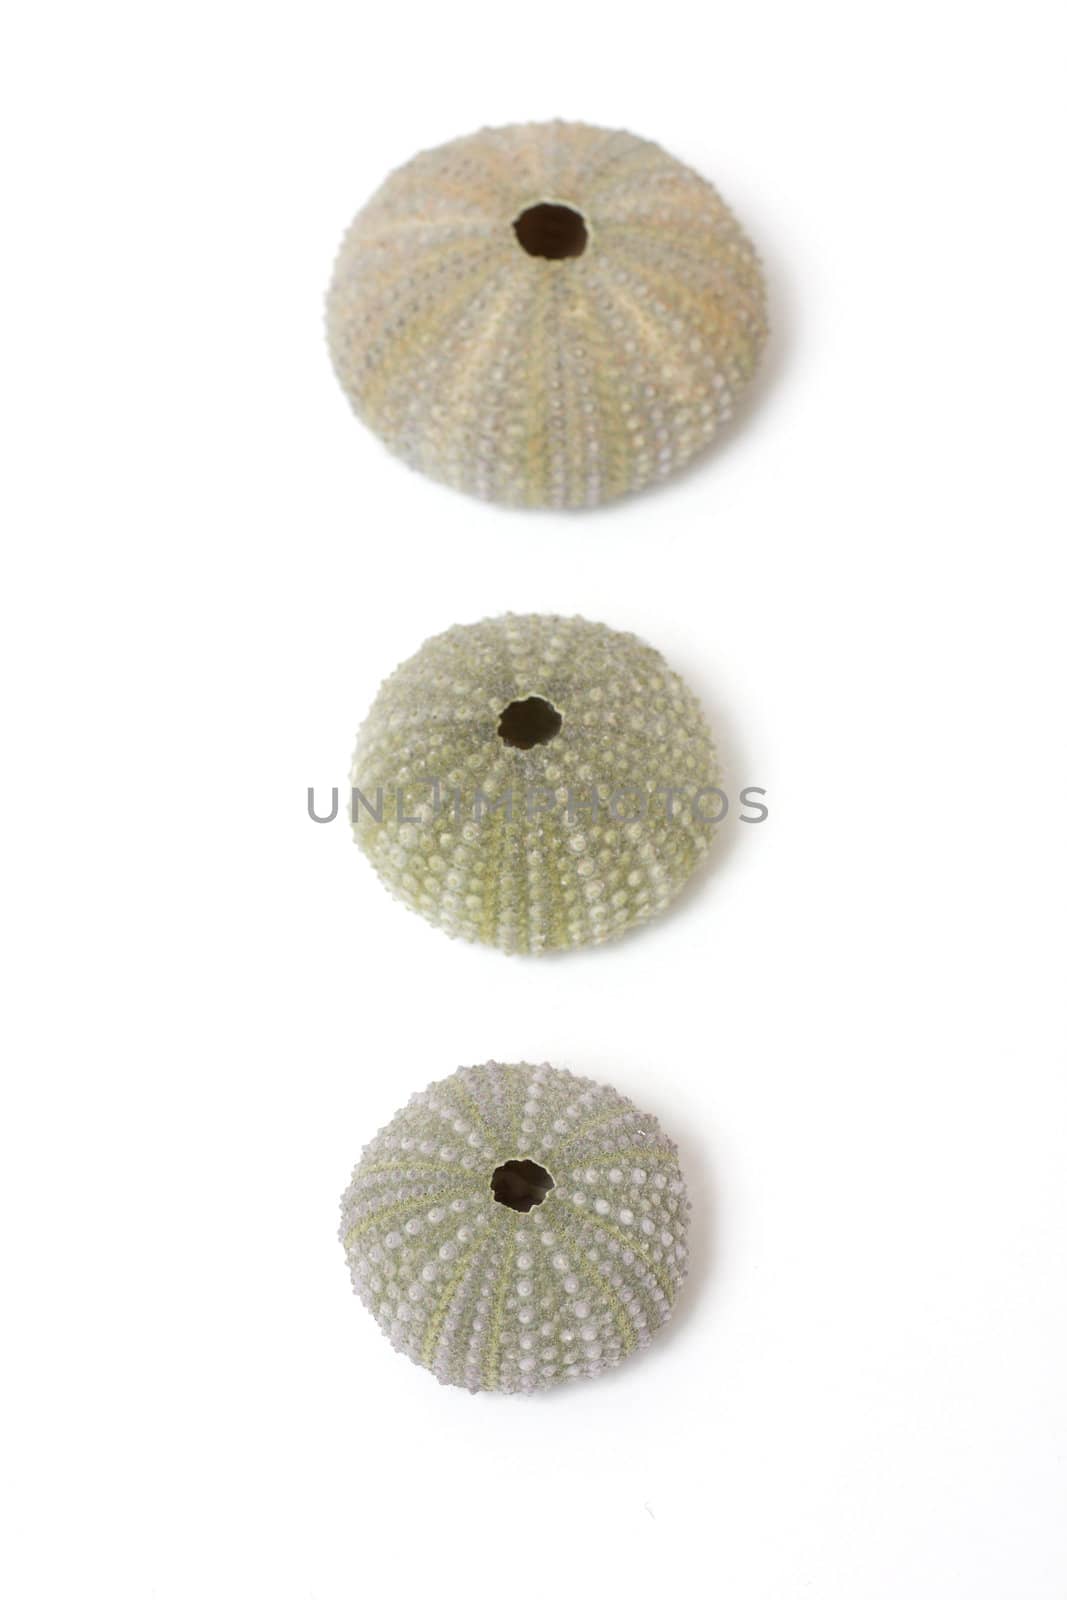 Fossilized sea urchins by leeser